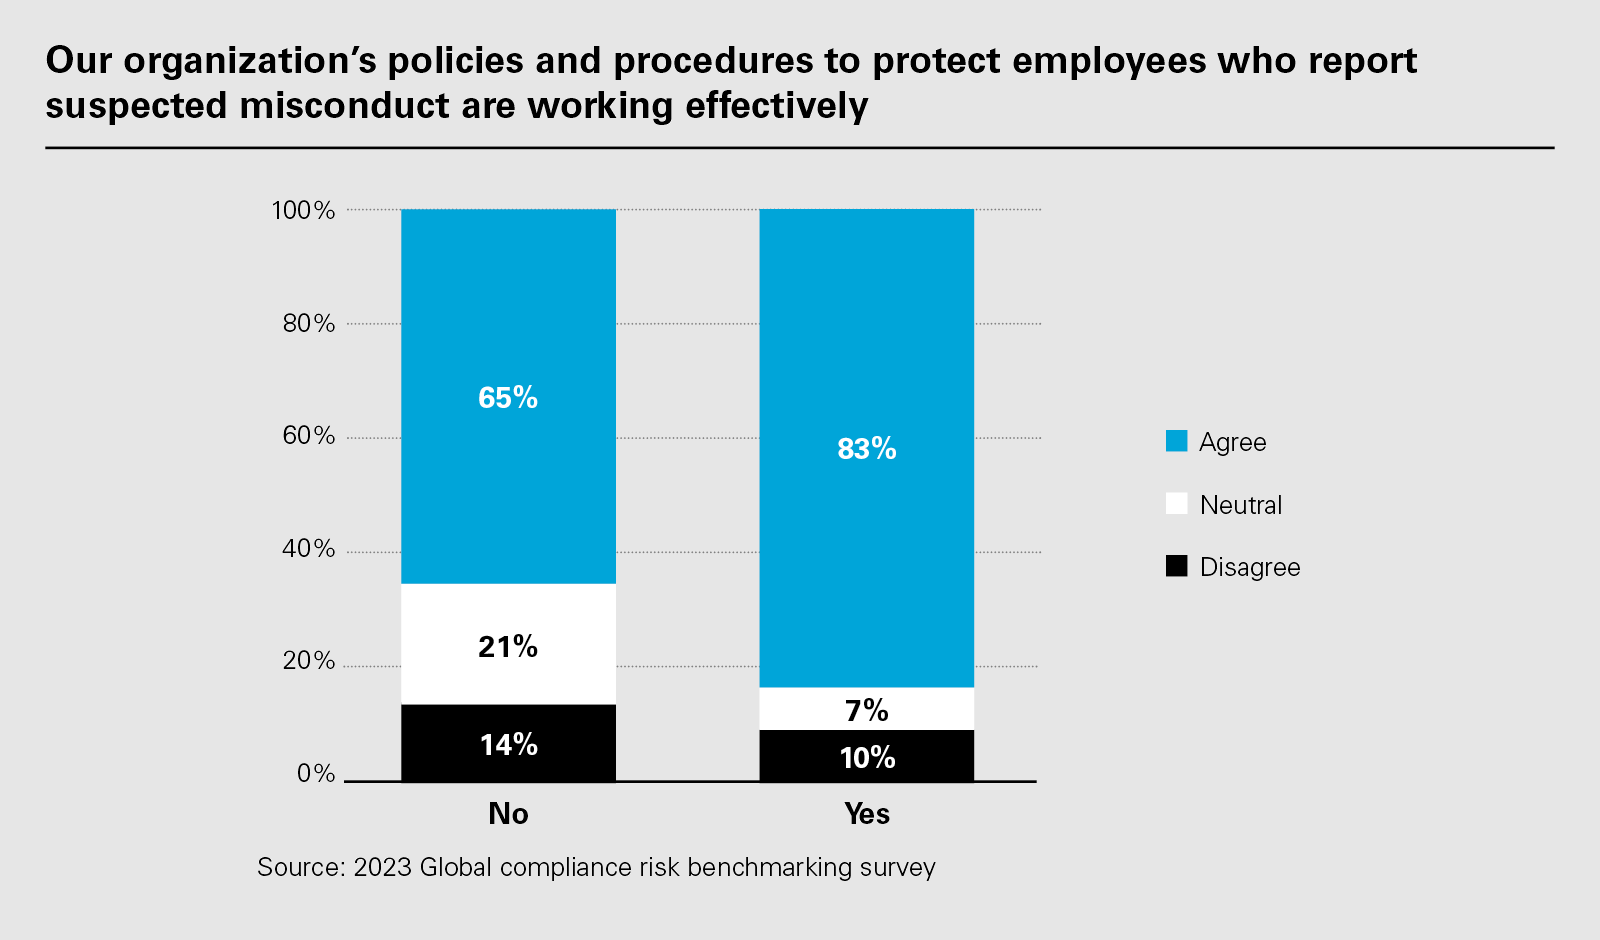 Our organization‘s policies and procedures to protect employees who report suspected misconduct are working effectively